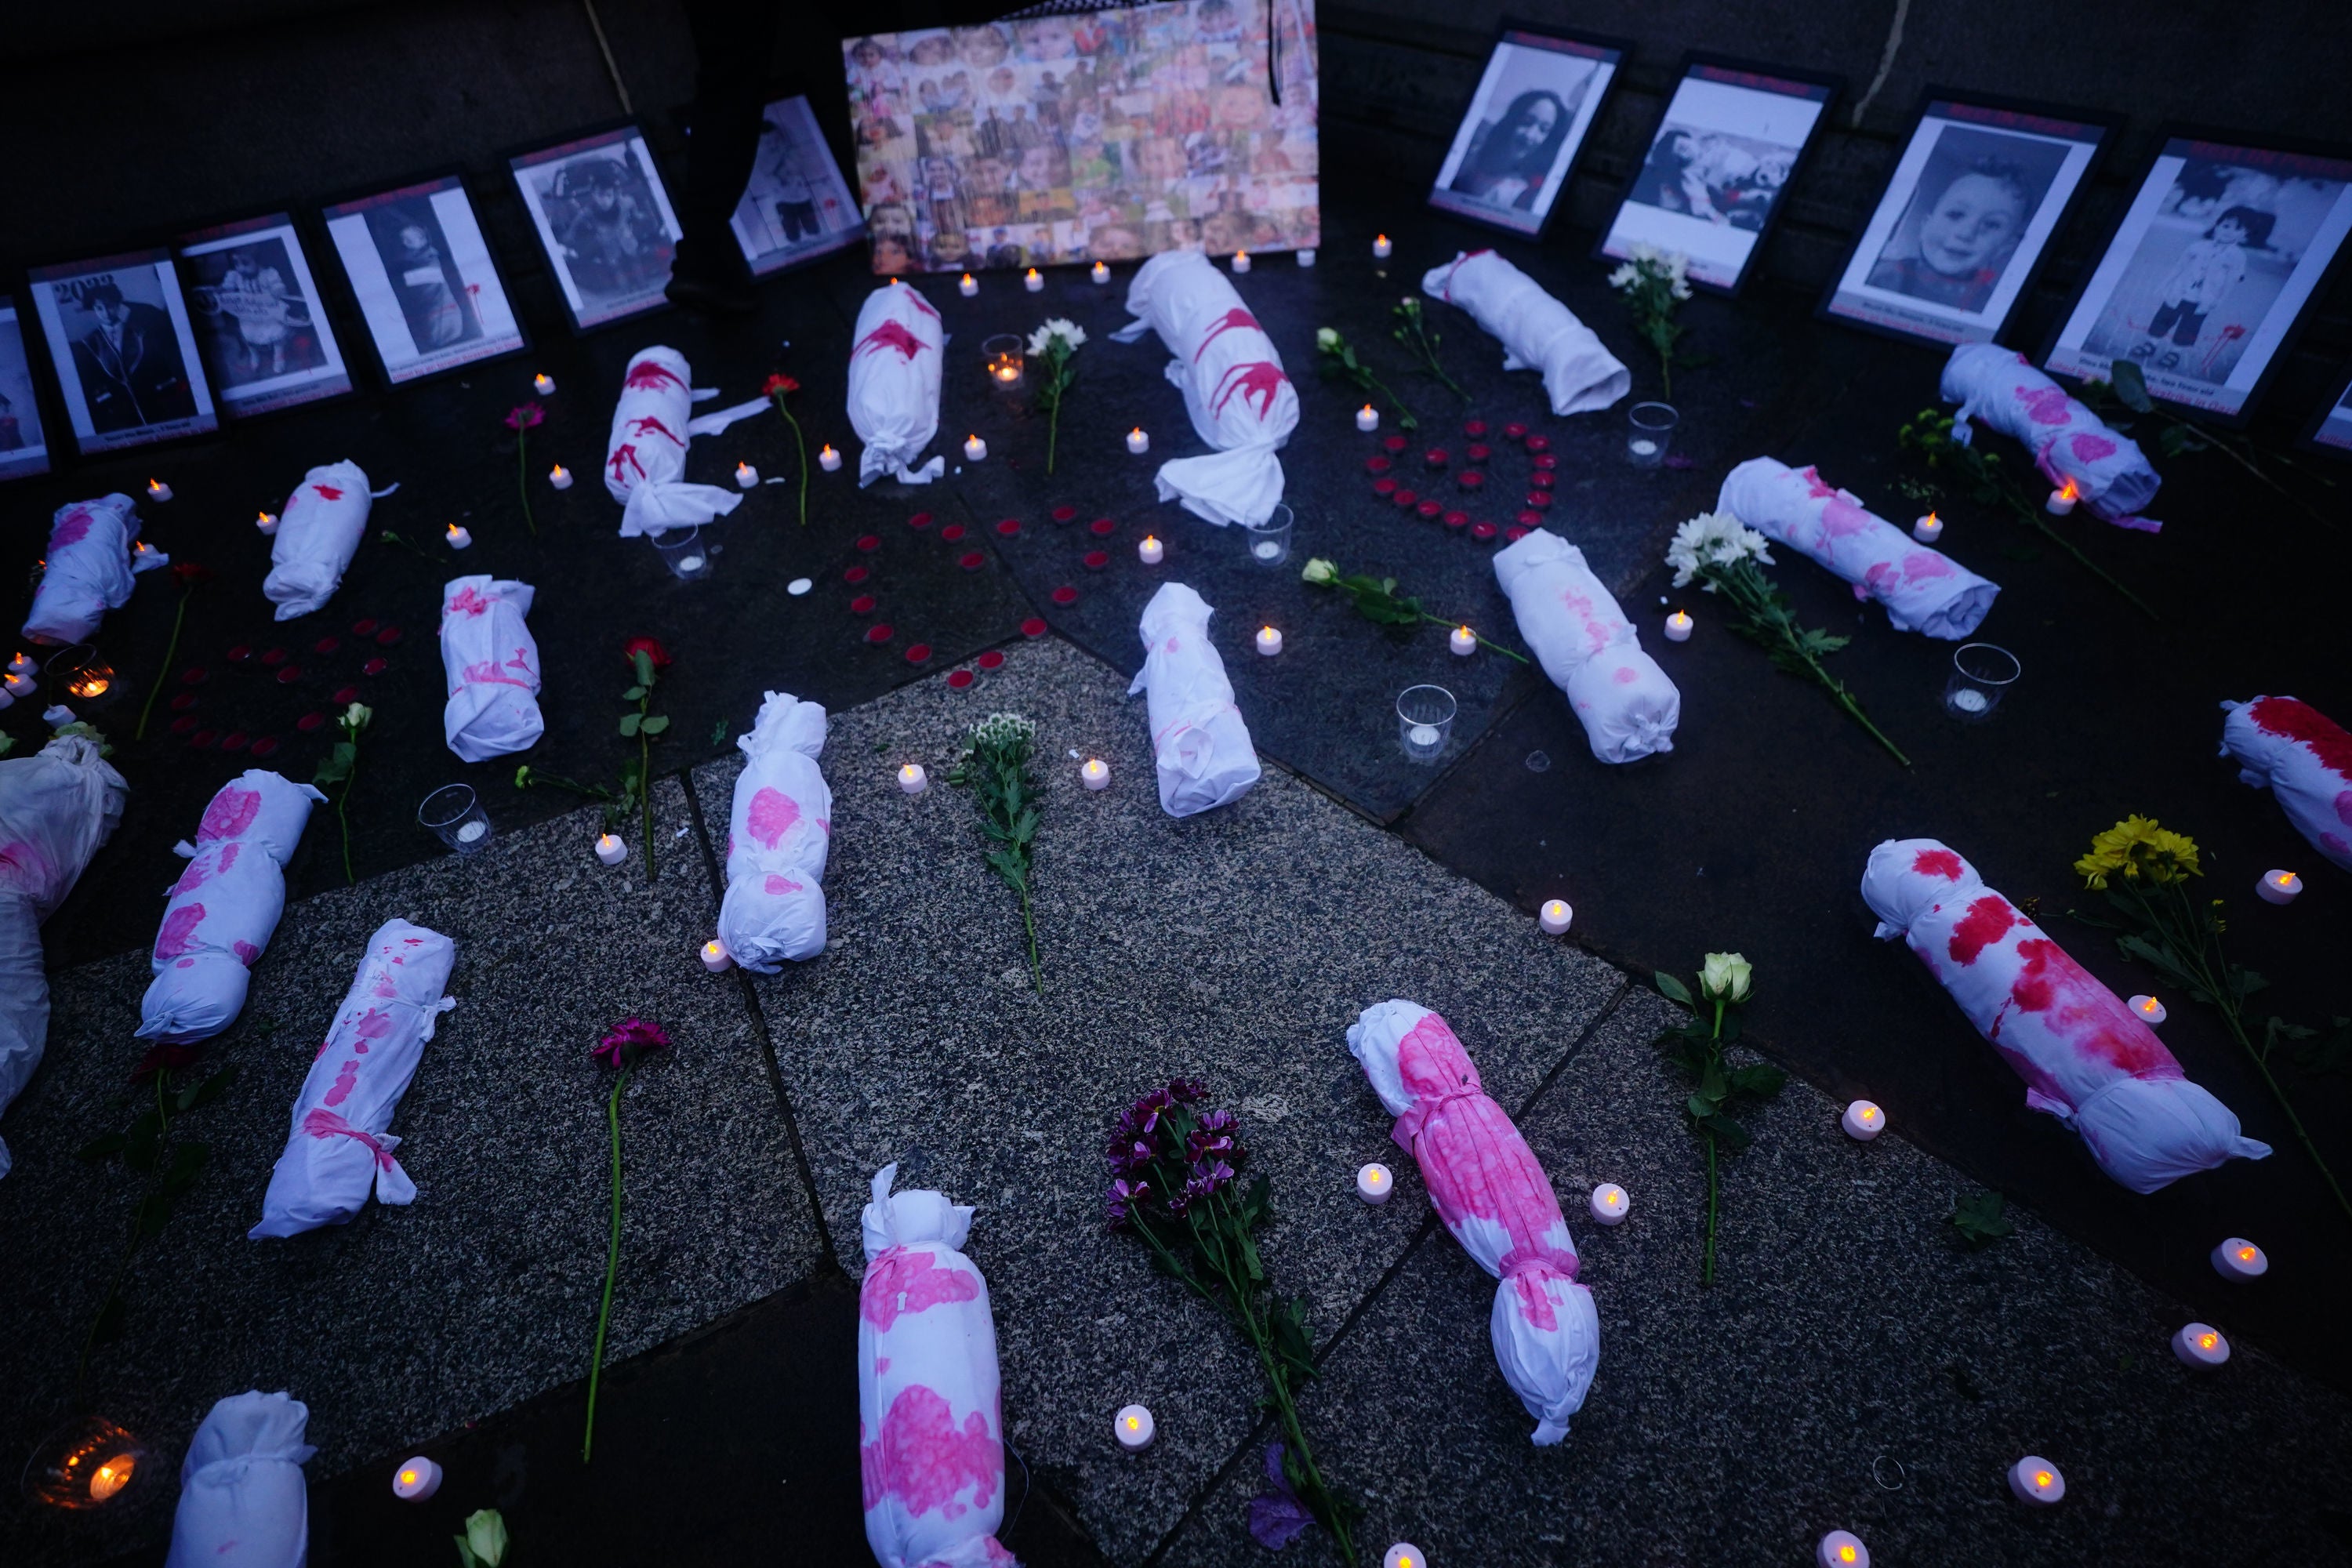 Effigies of dead babies were left on the ground in Trafalgar Square, next to pictures of children and candles.